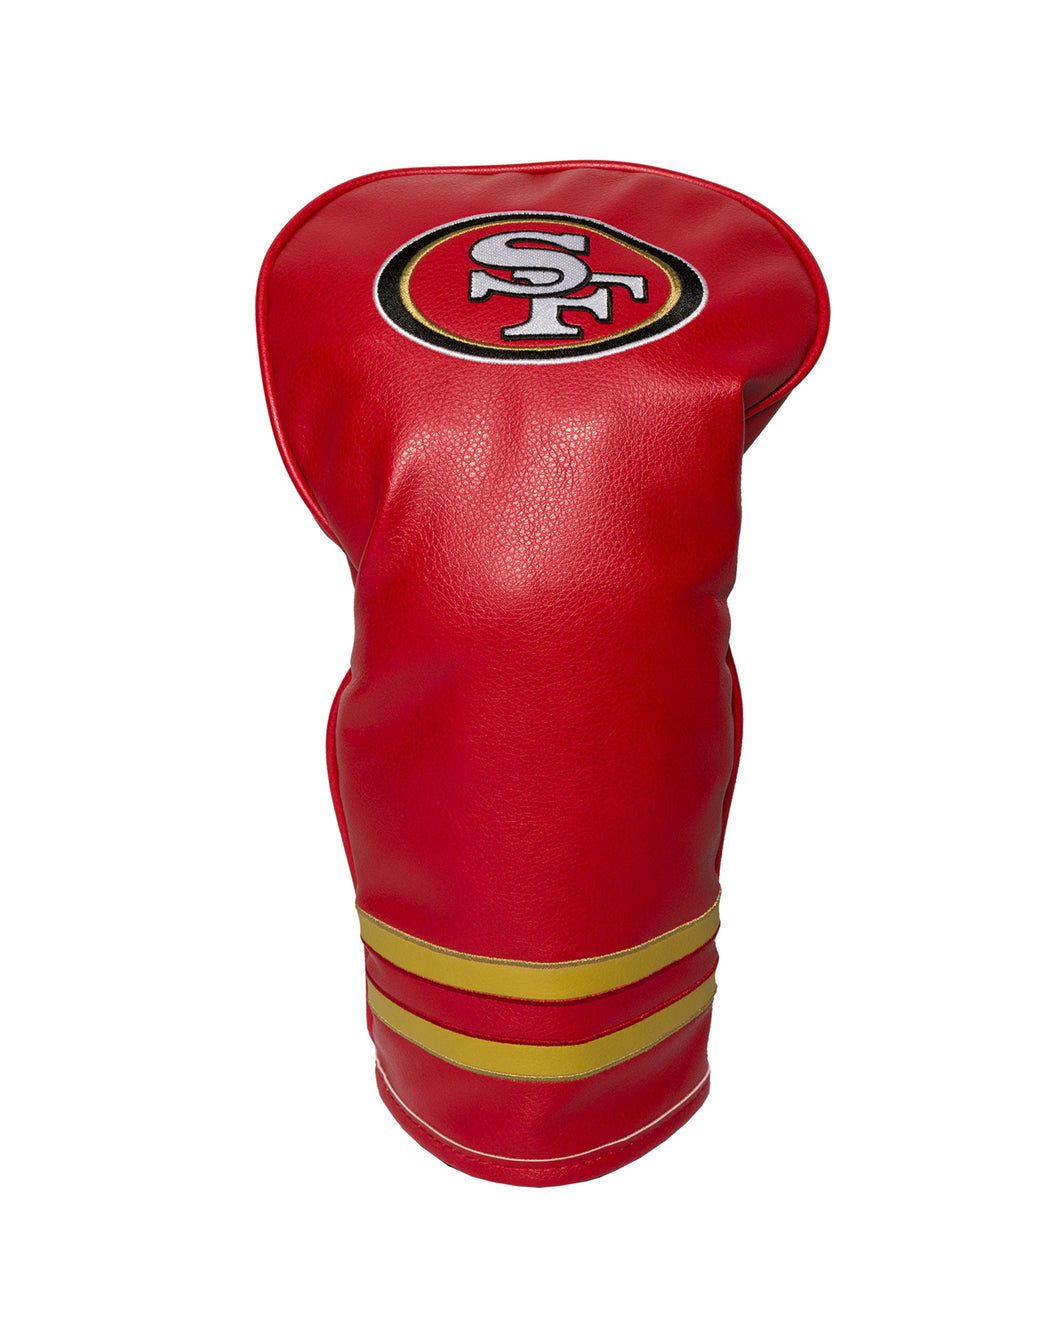 NFL Official Vintage Golf Fairway Wood Headcover. San Francisco 49 ERS